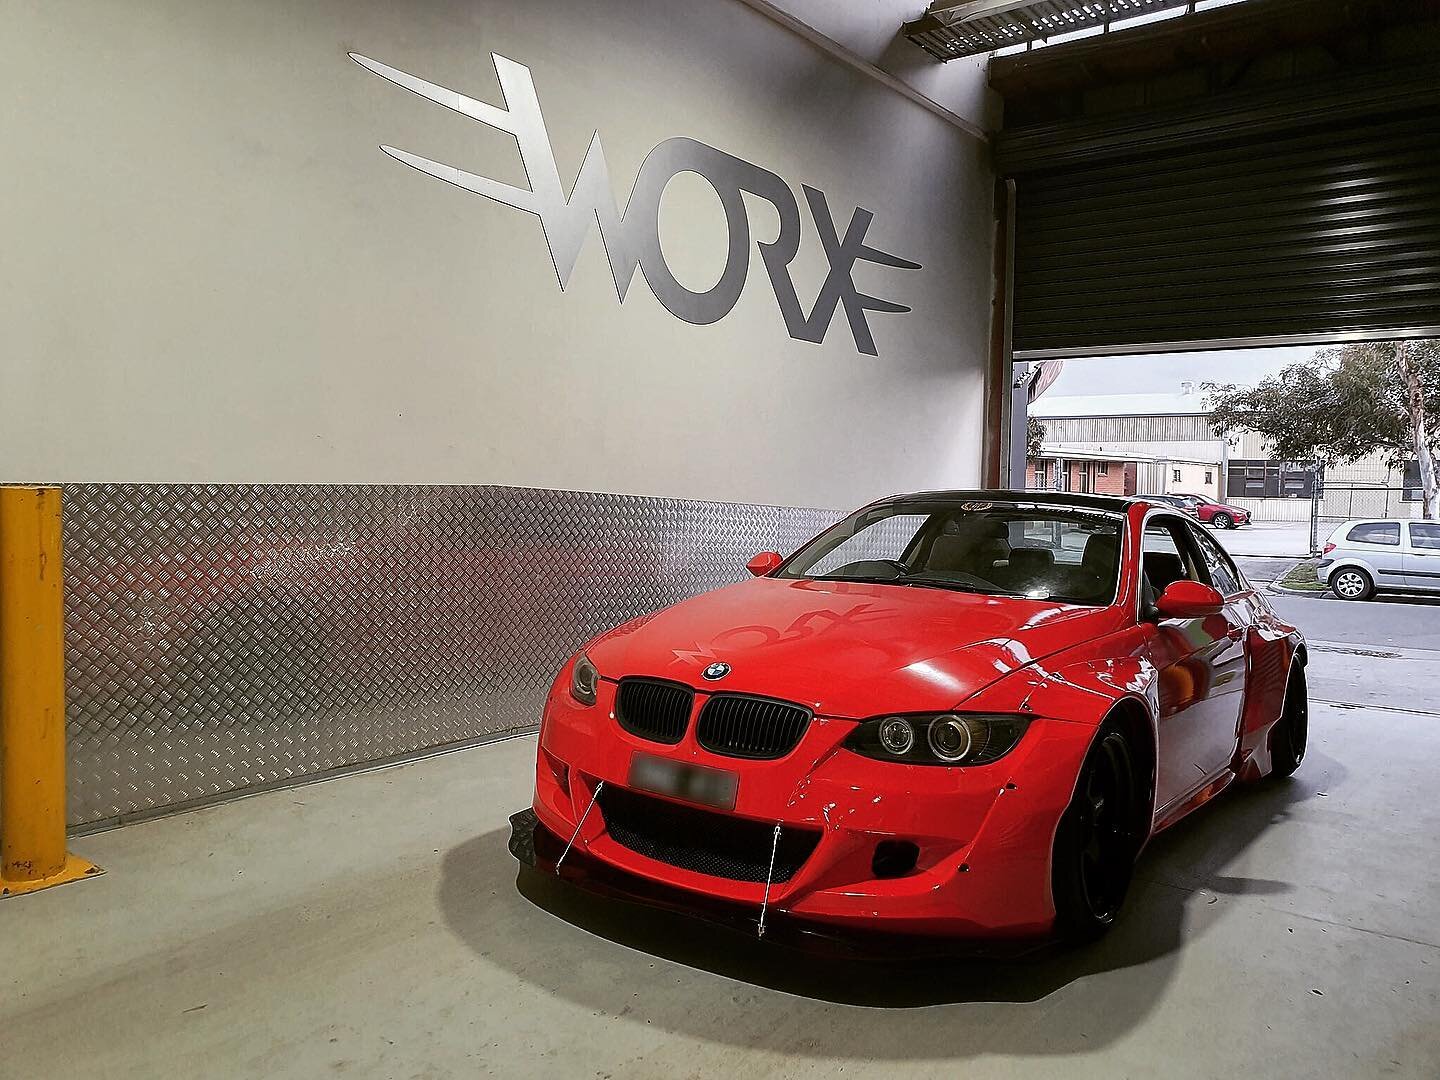 BMW 335i never looked so good 😍😍 If you think it looks wide from this angle....swipe right 😏

#worxauto #workmeister #n54gang #n54 #335icoupe #worx #worxperformance #bmwgang #widebody #fatbmw #widebodykit #bmwworldwide #workmeisters #reservoir #me